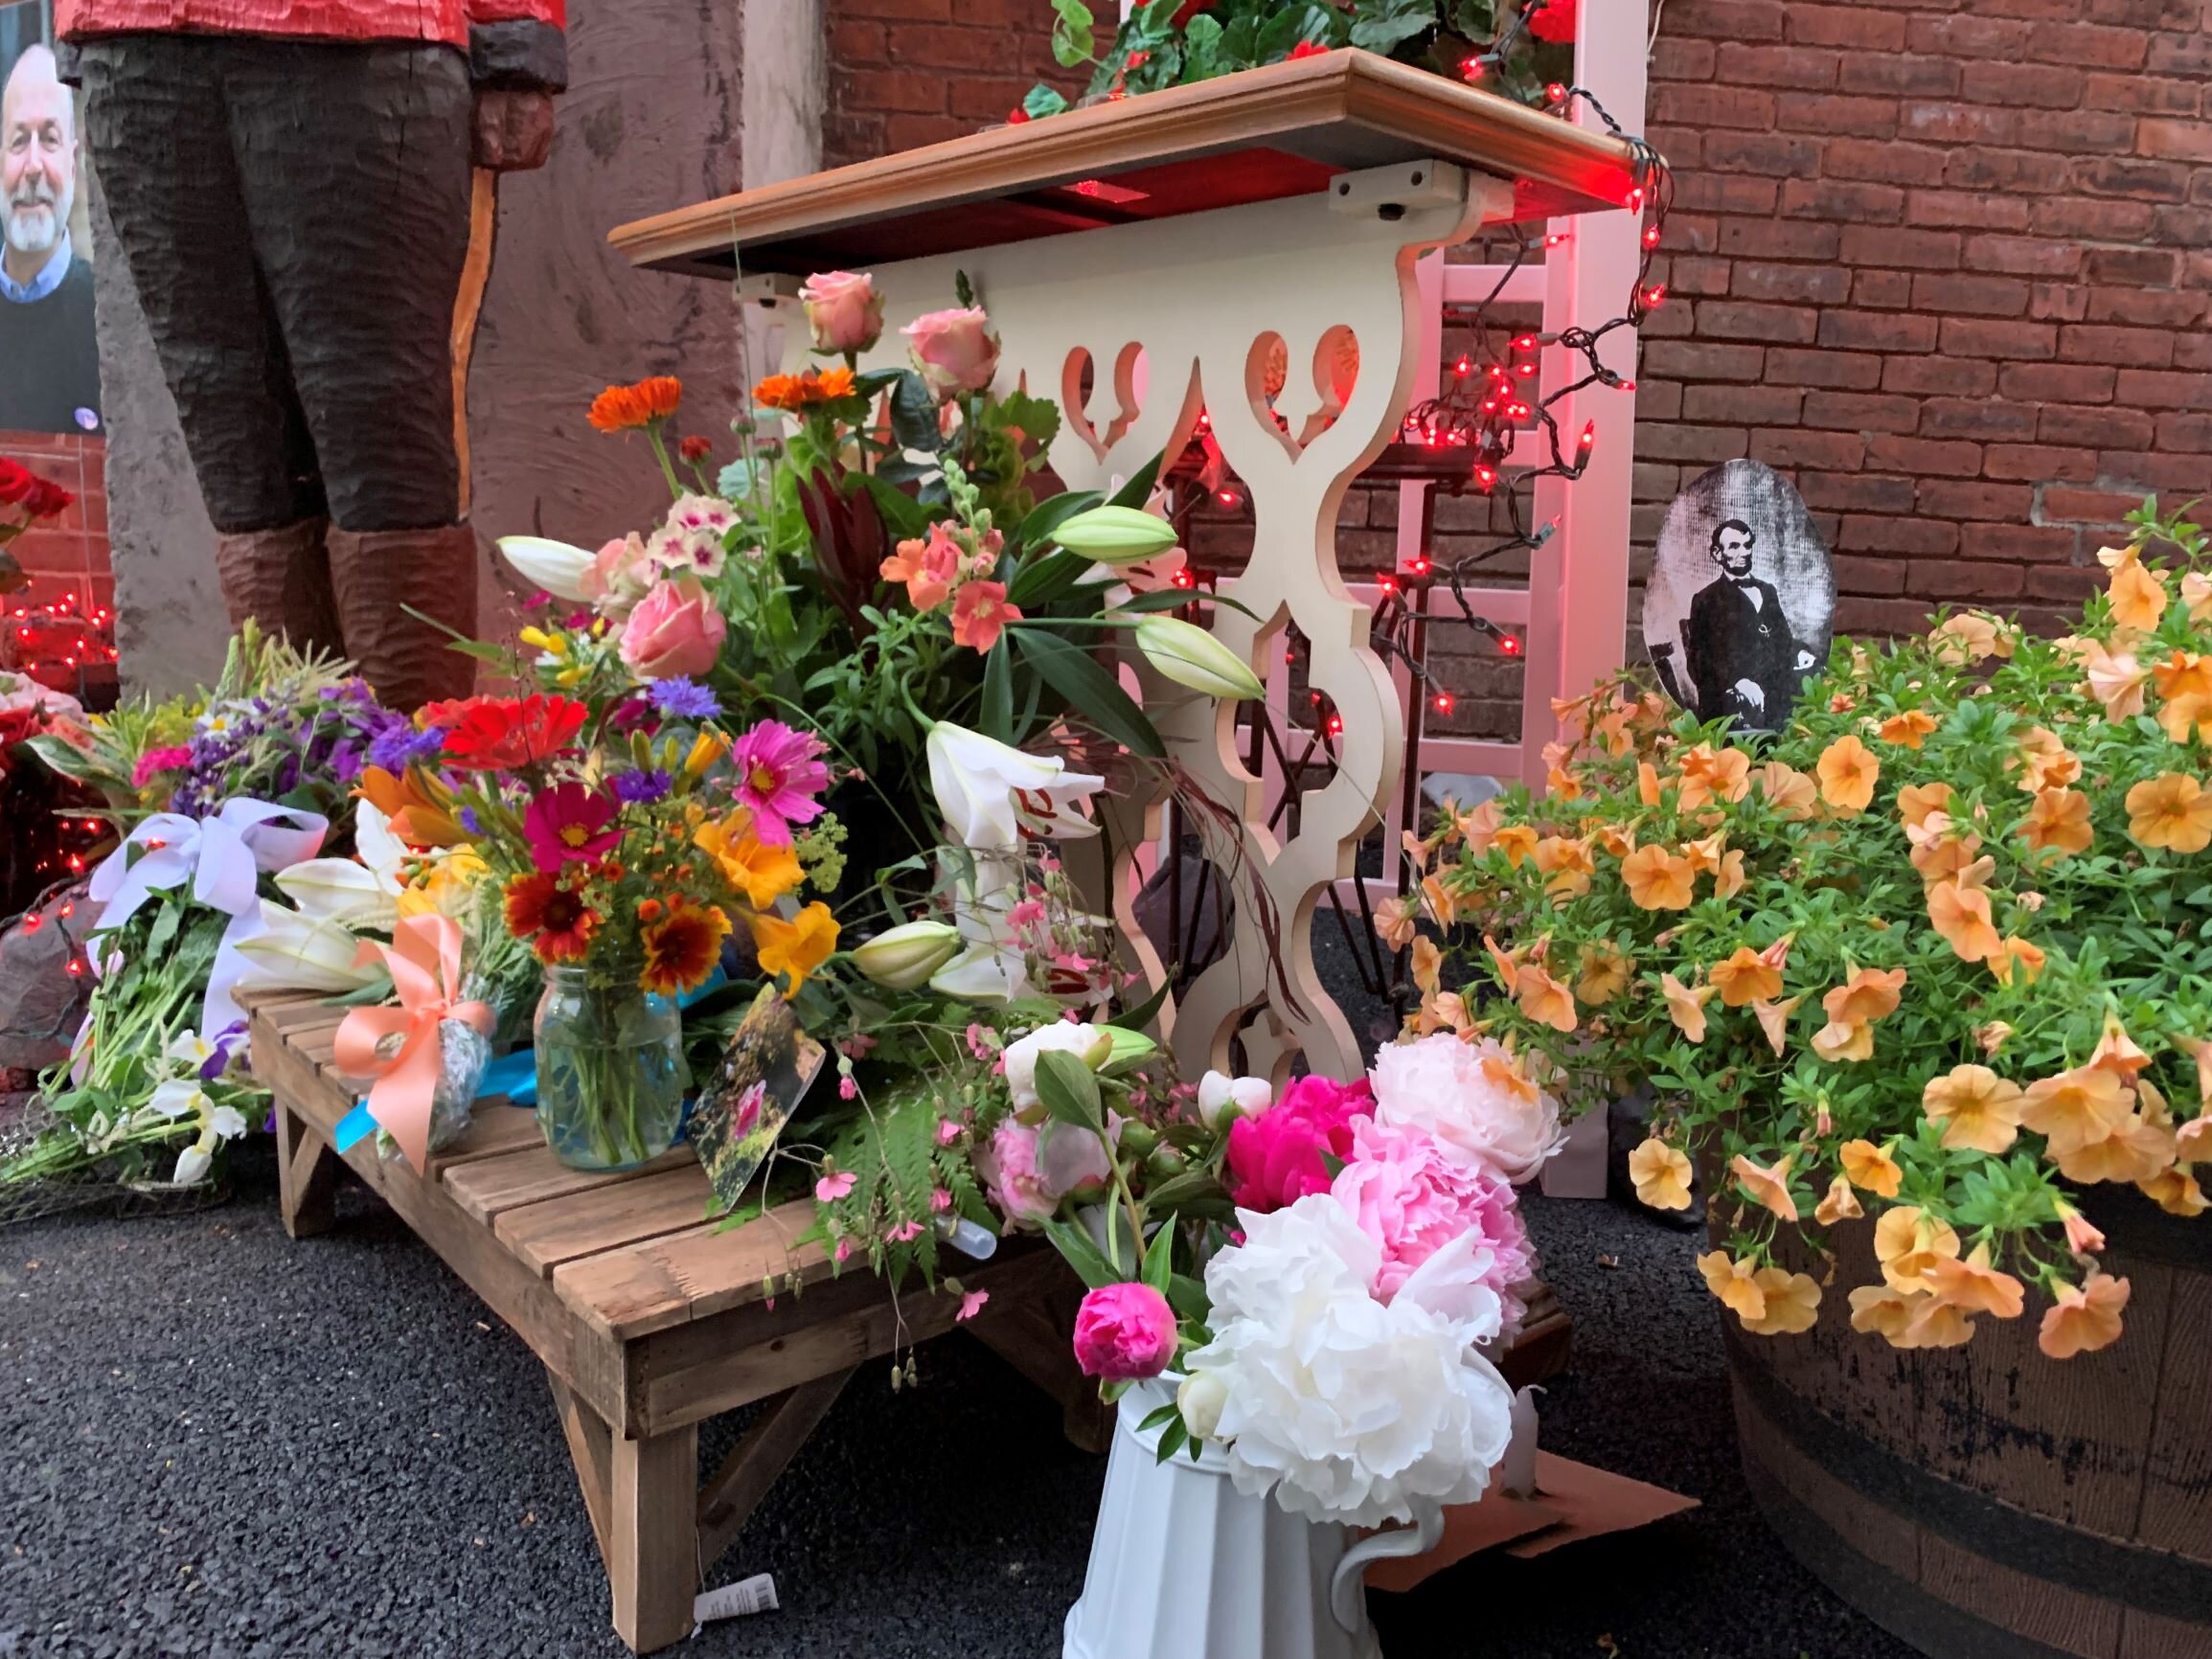   The quickly assembled memorial incudes flowers and mementos including a picture of President Abraham Lincoln in a nod to Jack Carter's love of Civil War history. Photo by Lisa Scagliotti.  